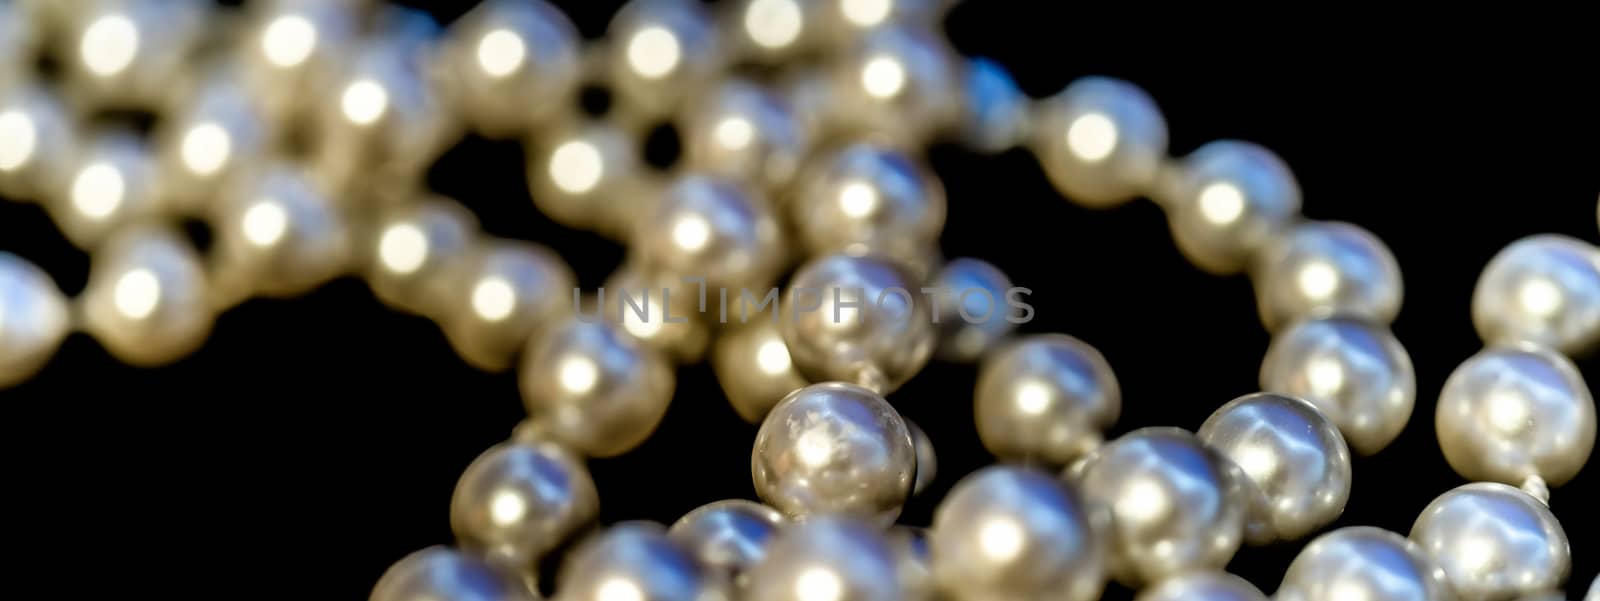 Abstract picture of a pearl necklace, front and rear intentional by geogif